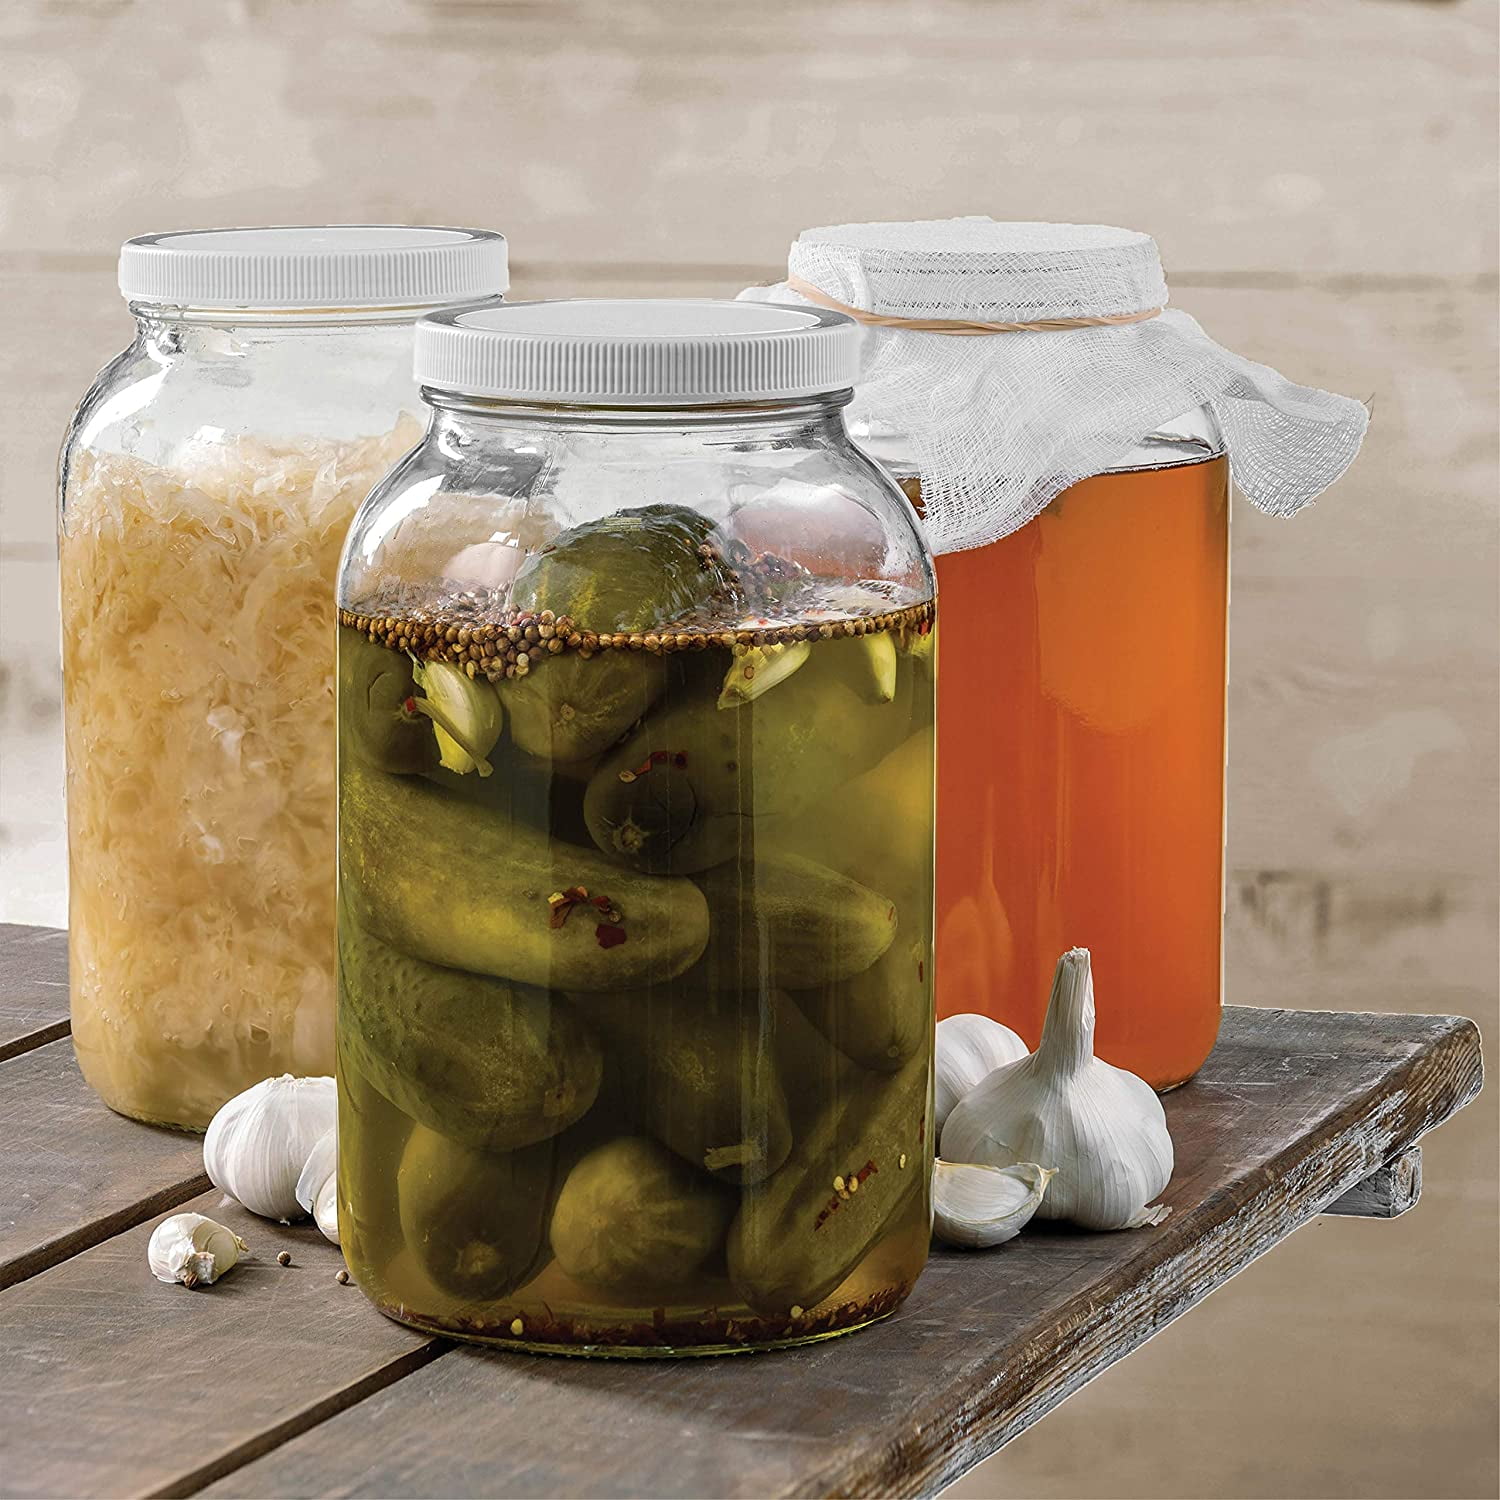 HFS(R) 1 Pack 1 Gallon Extra Large Glass Jar Wide Mouth with Plastic Lid